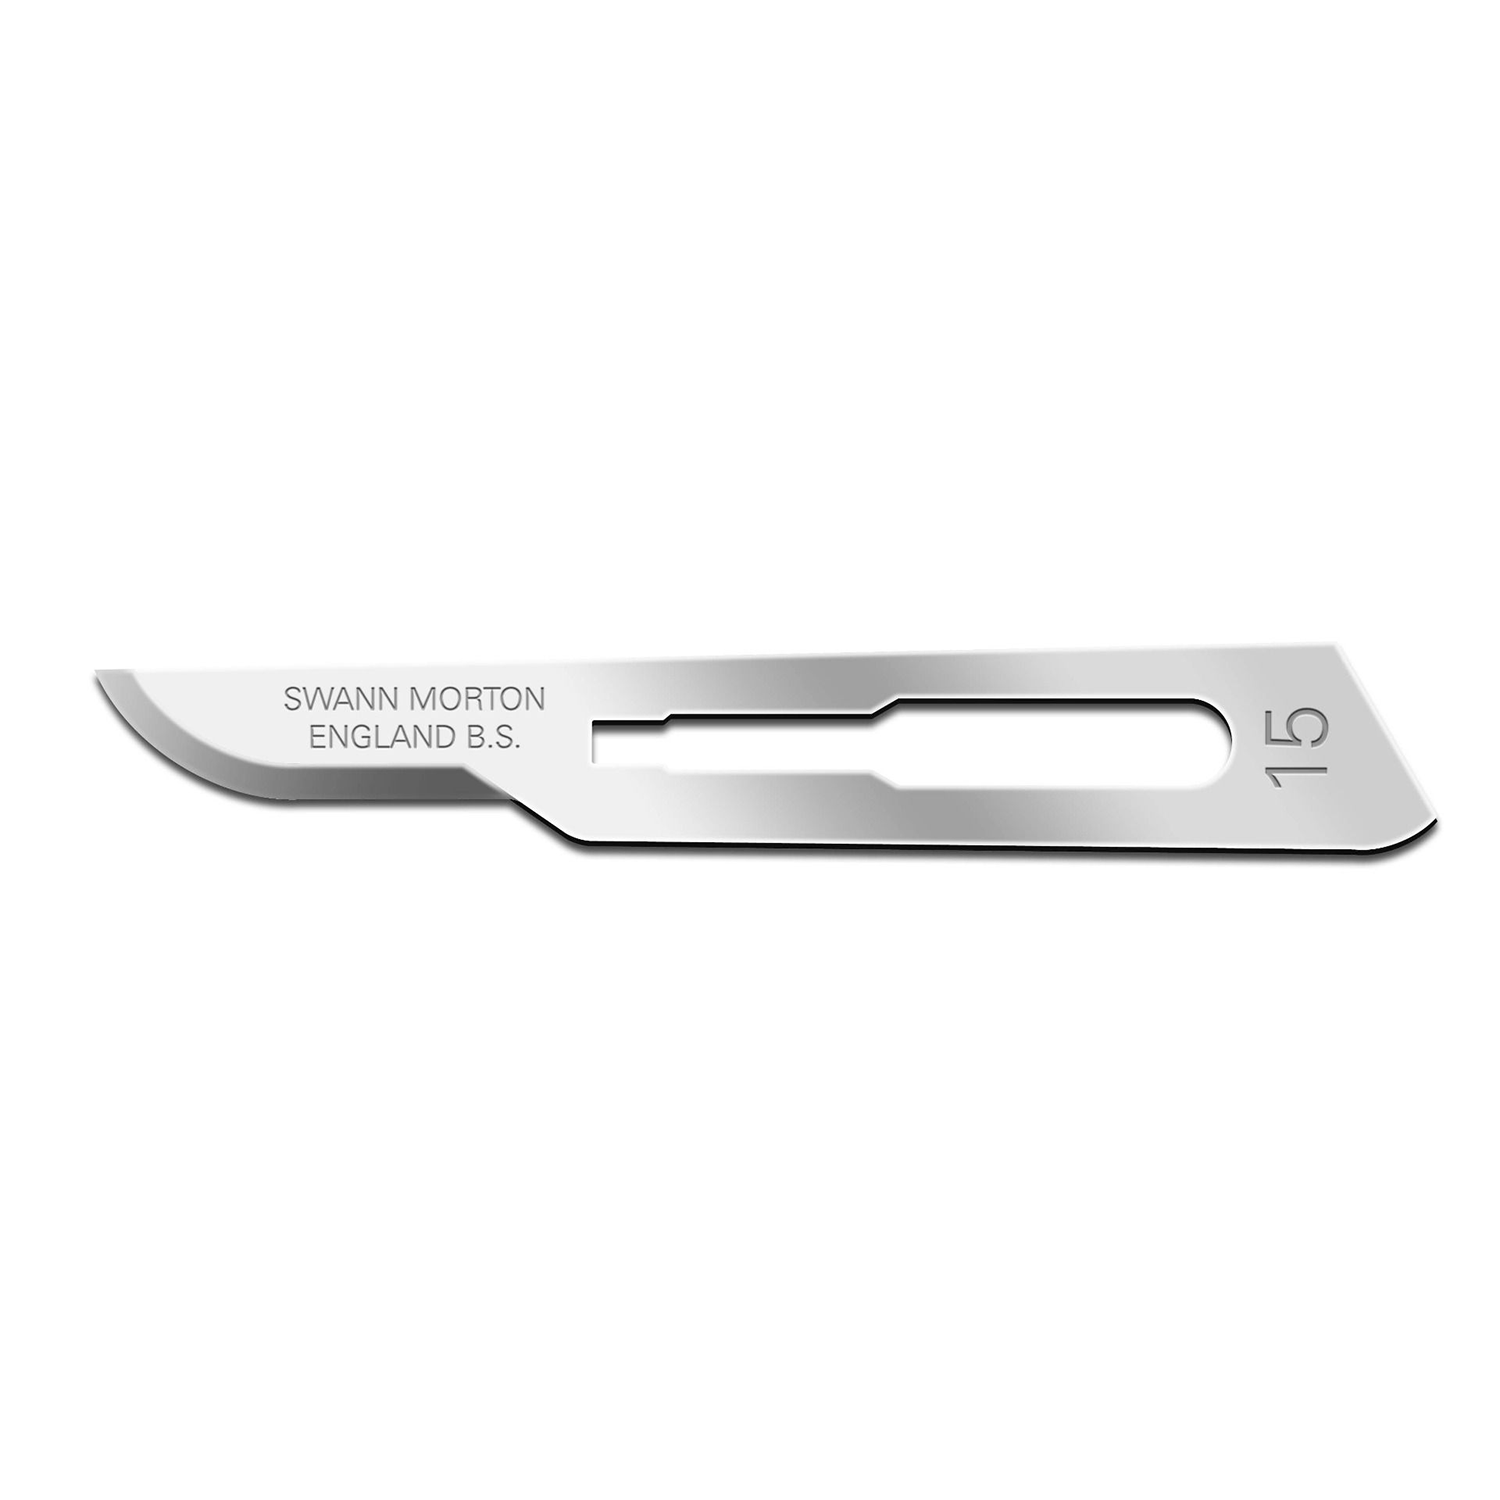 Swann Morton Carbon Steel Surgical Blades | No.15 | Non-Sterile | Pack of 100